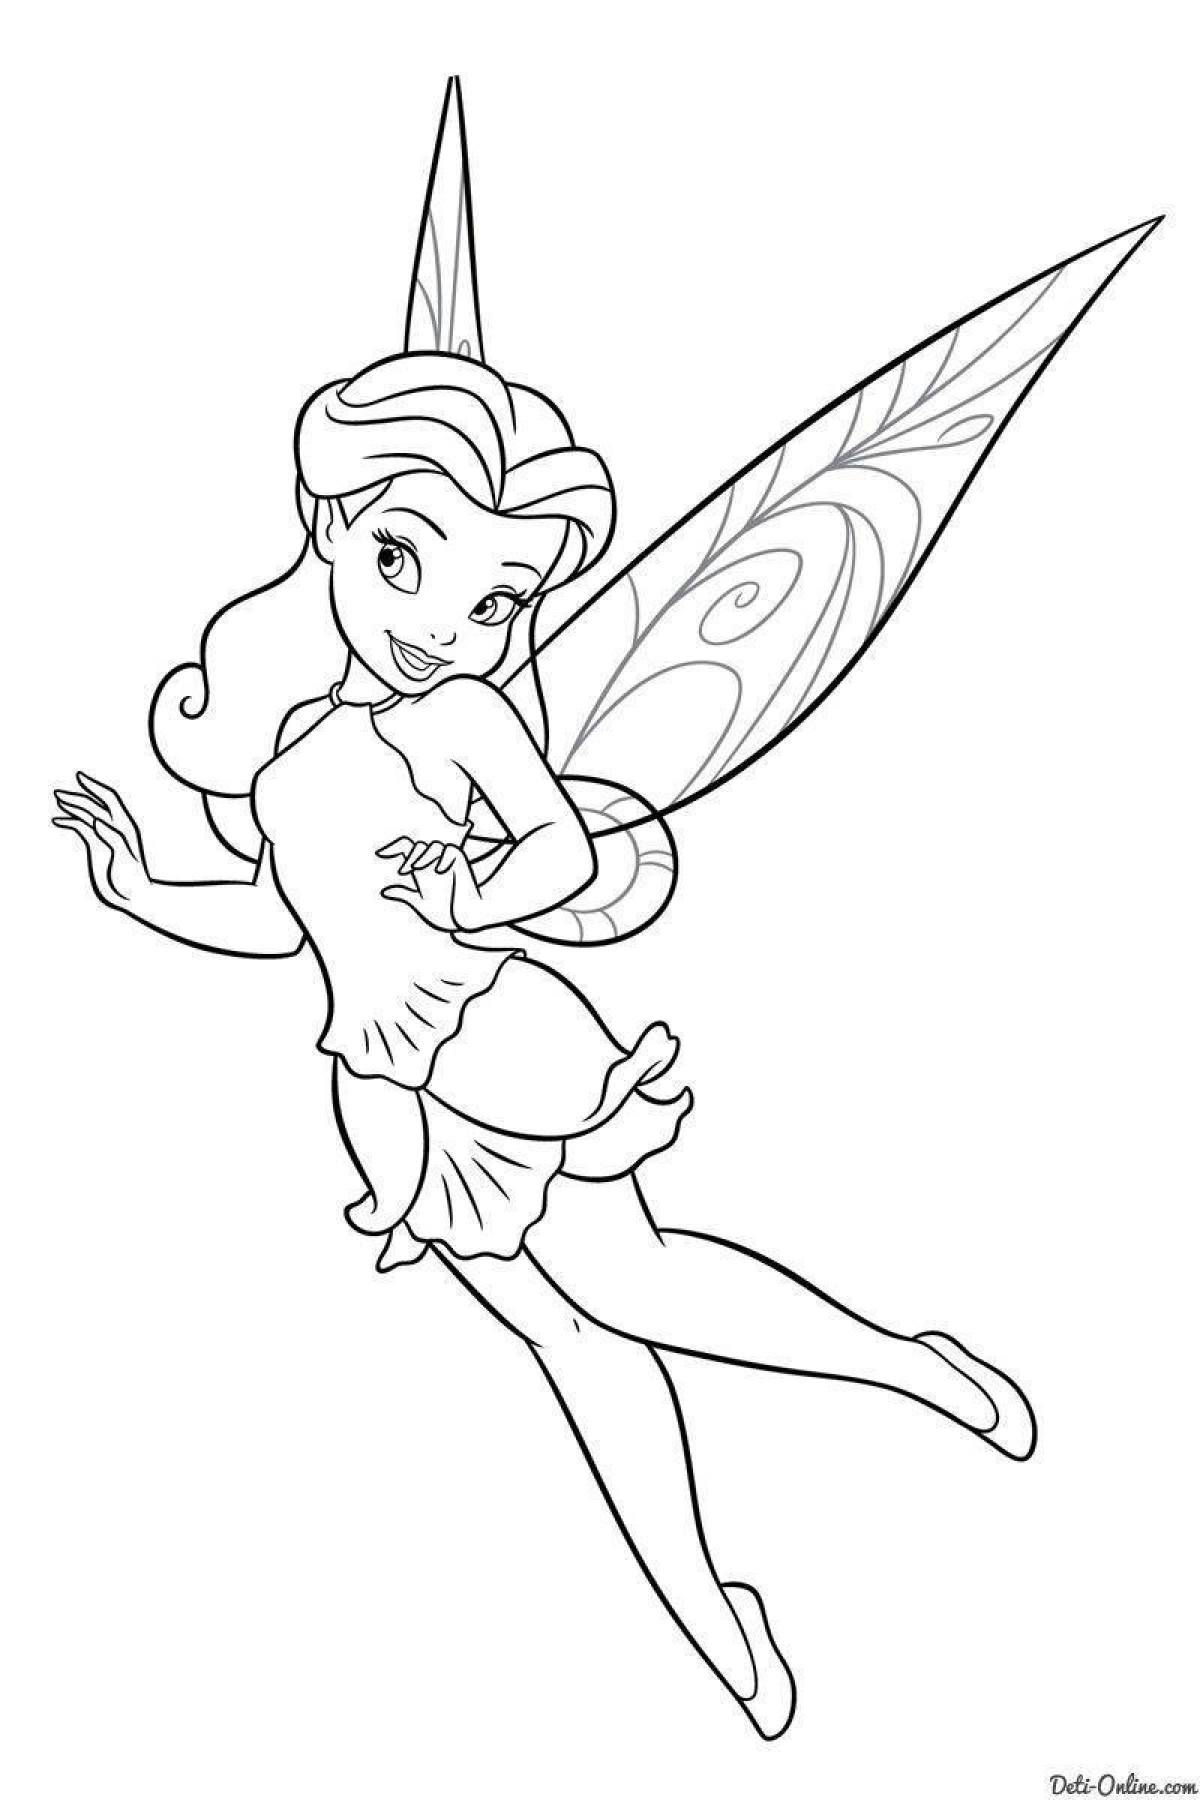 Surreal fairy coloring pages